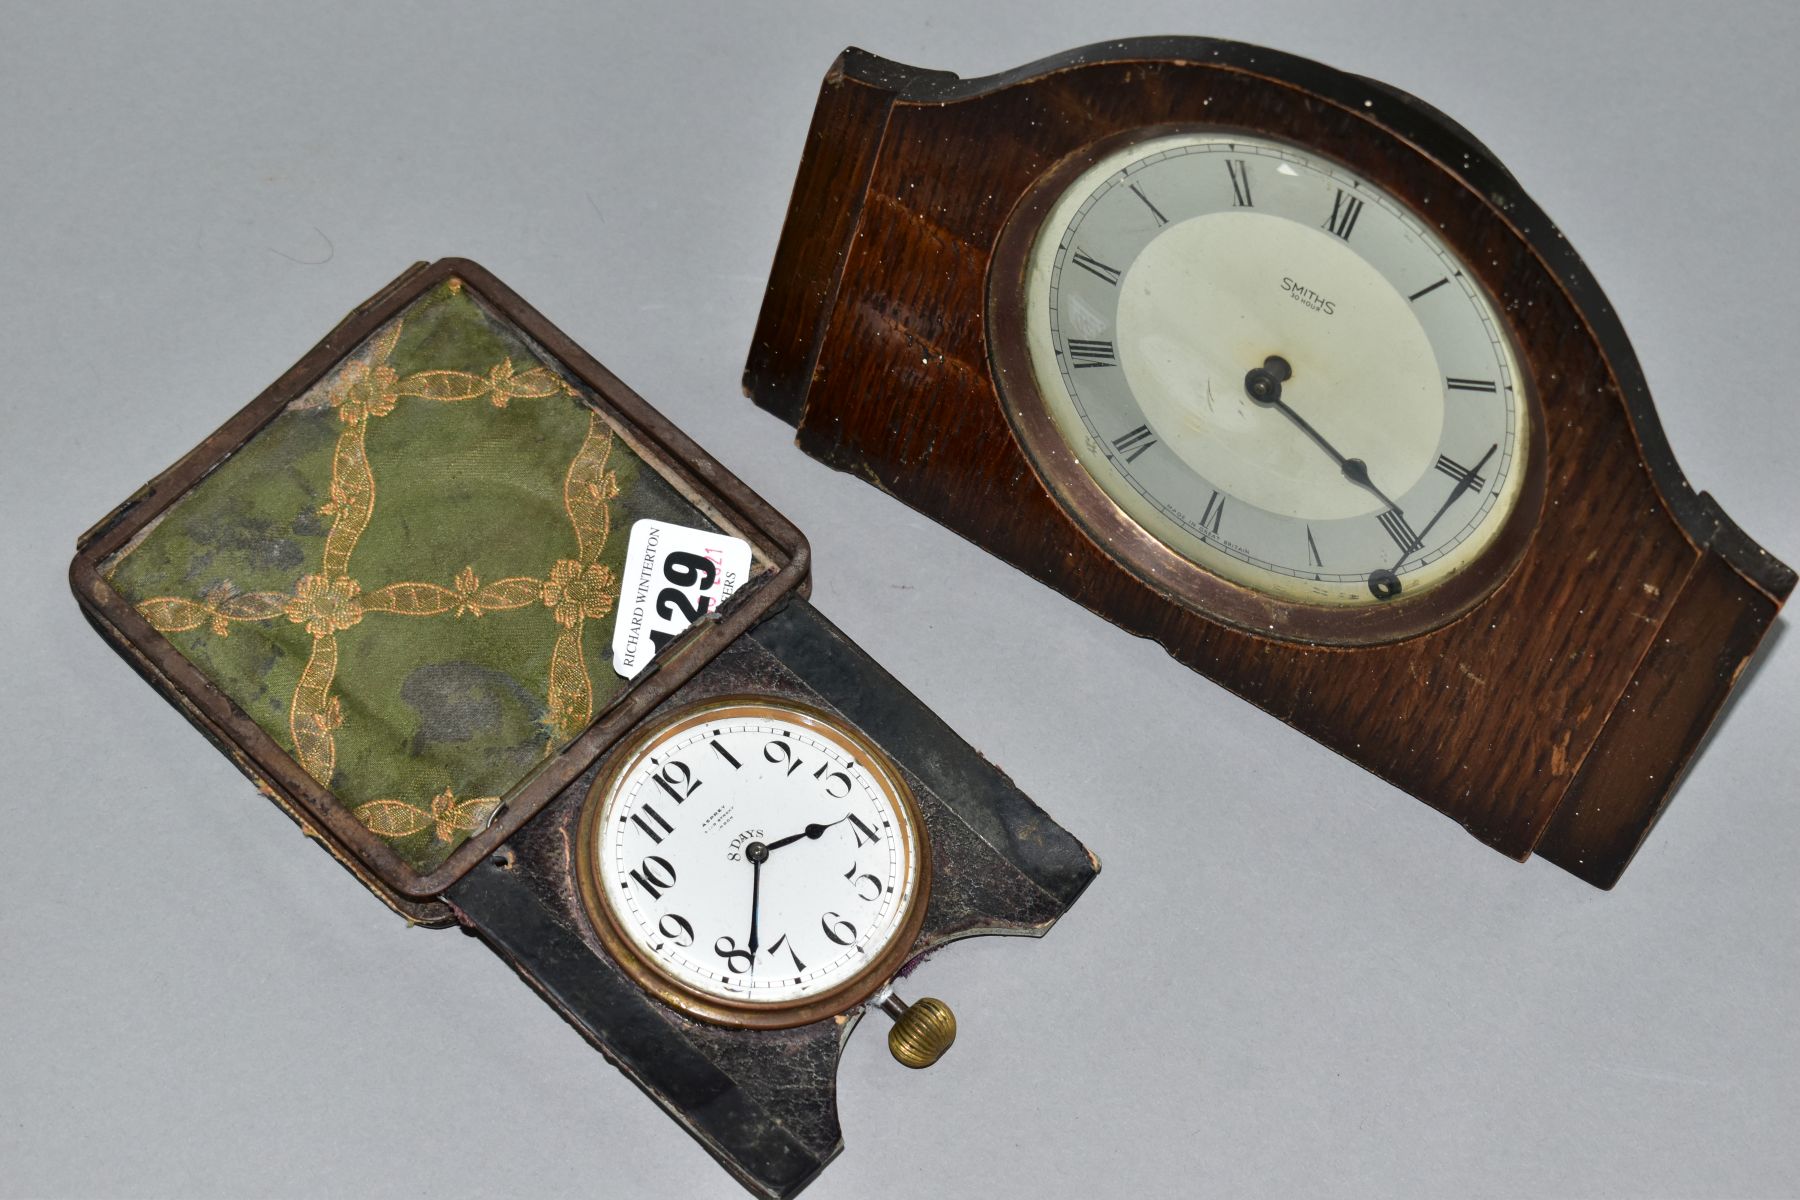 AN EARLY 20TH CENTURY ASPREY 8 DAY TRAVEL CLOCK, in a damaged leather folding case, incomplete, - Image 5 of 5